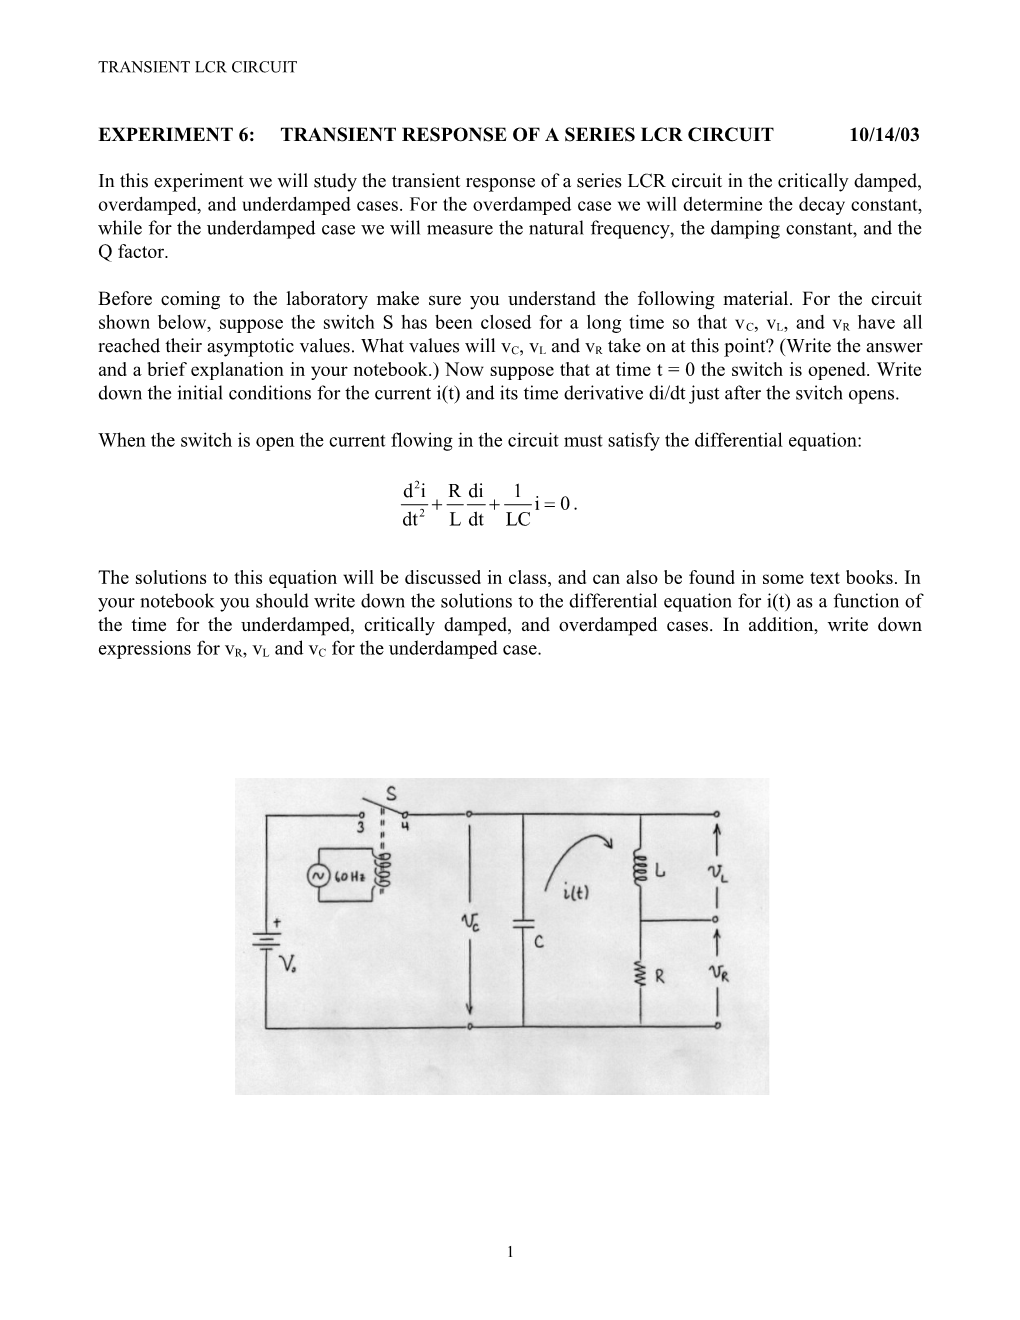 Experiment 6: Transient Response of a Series Lcr Circuit